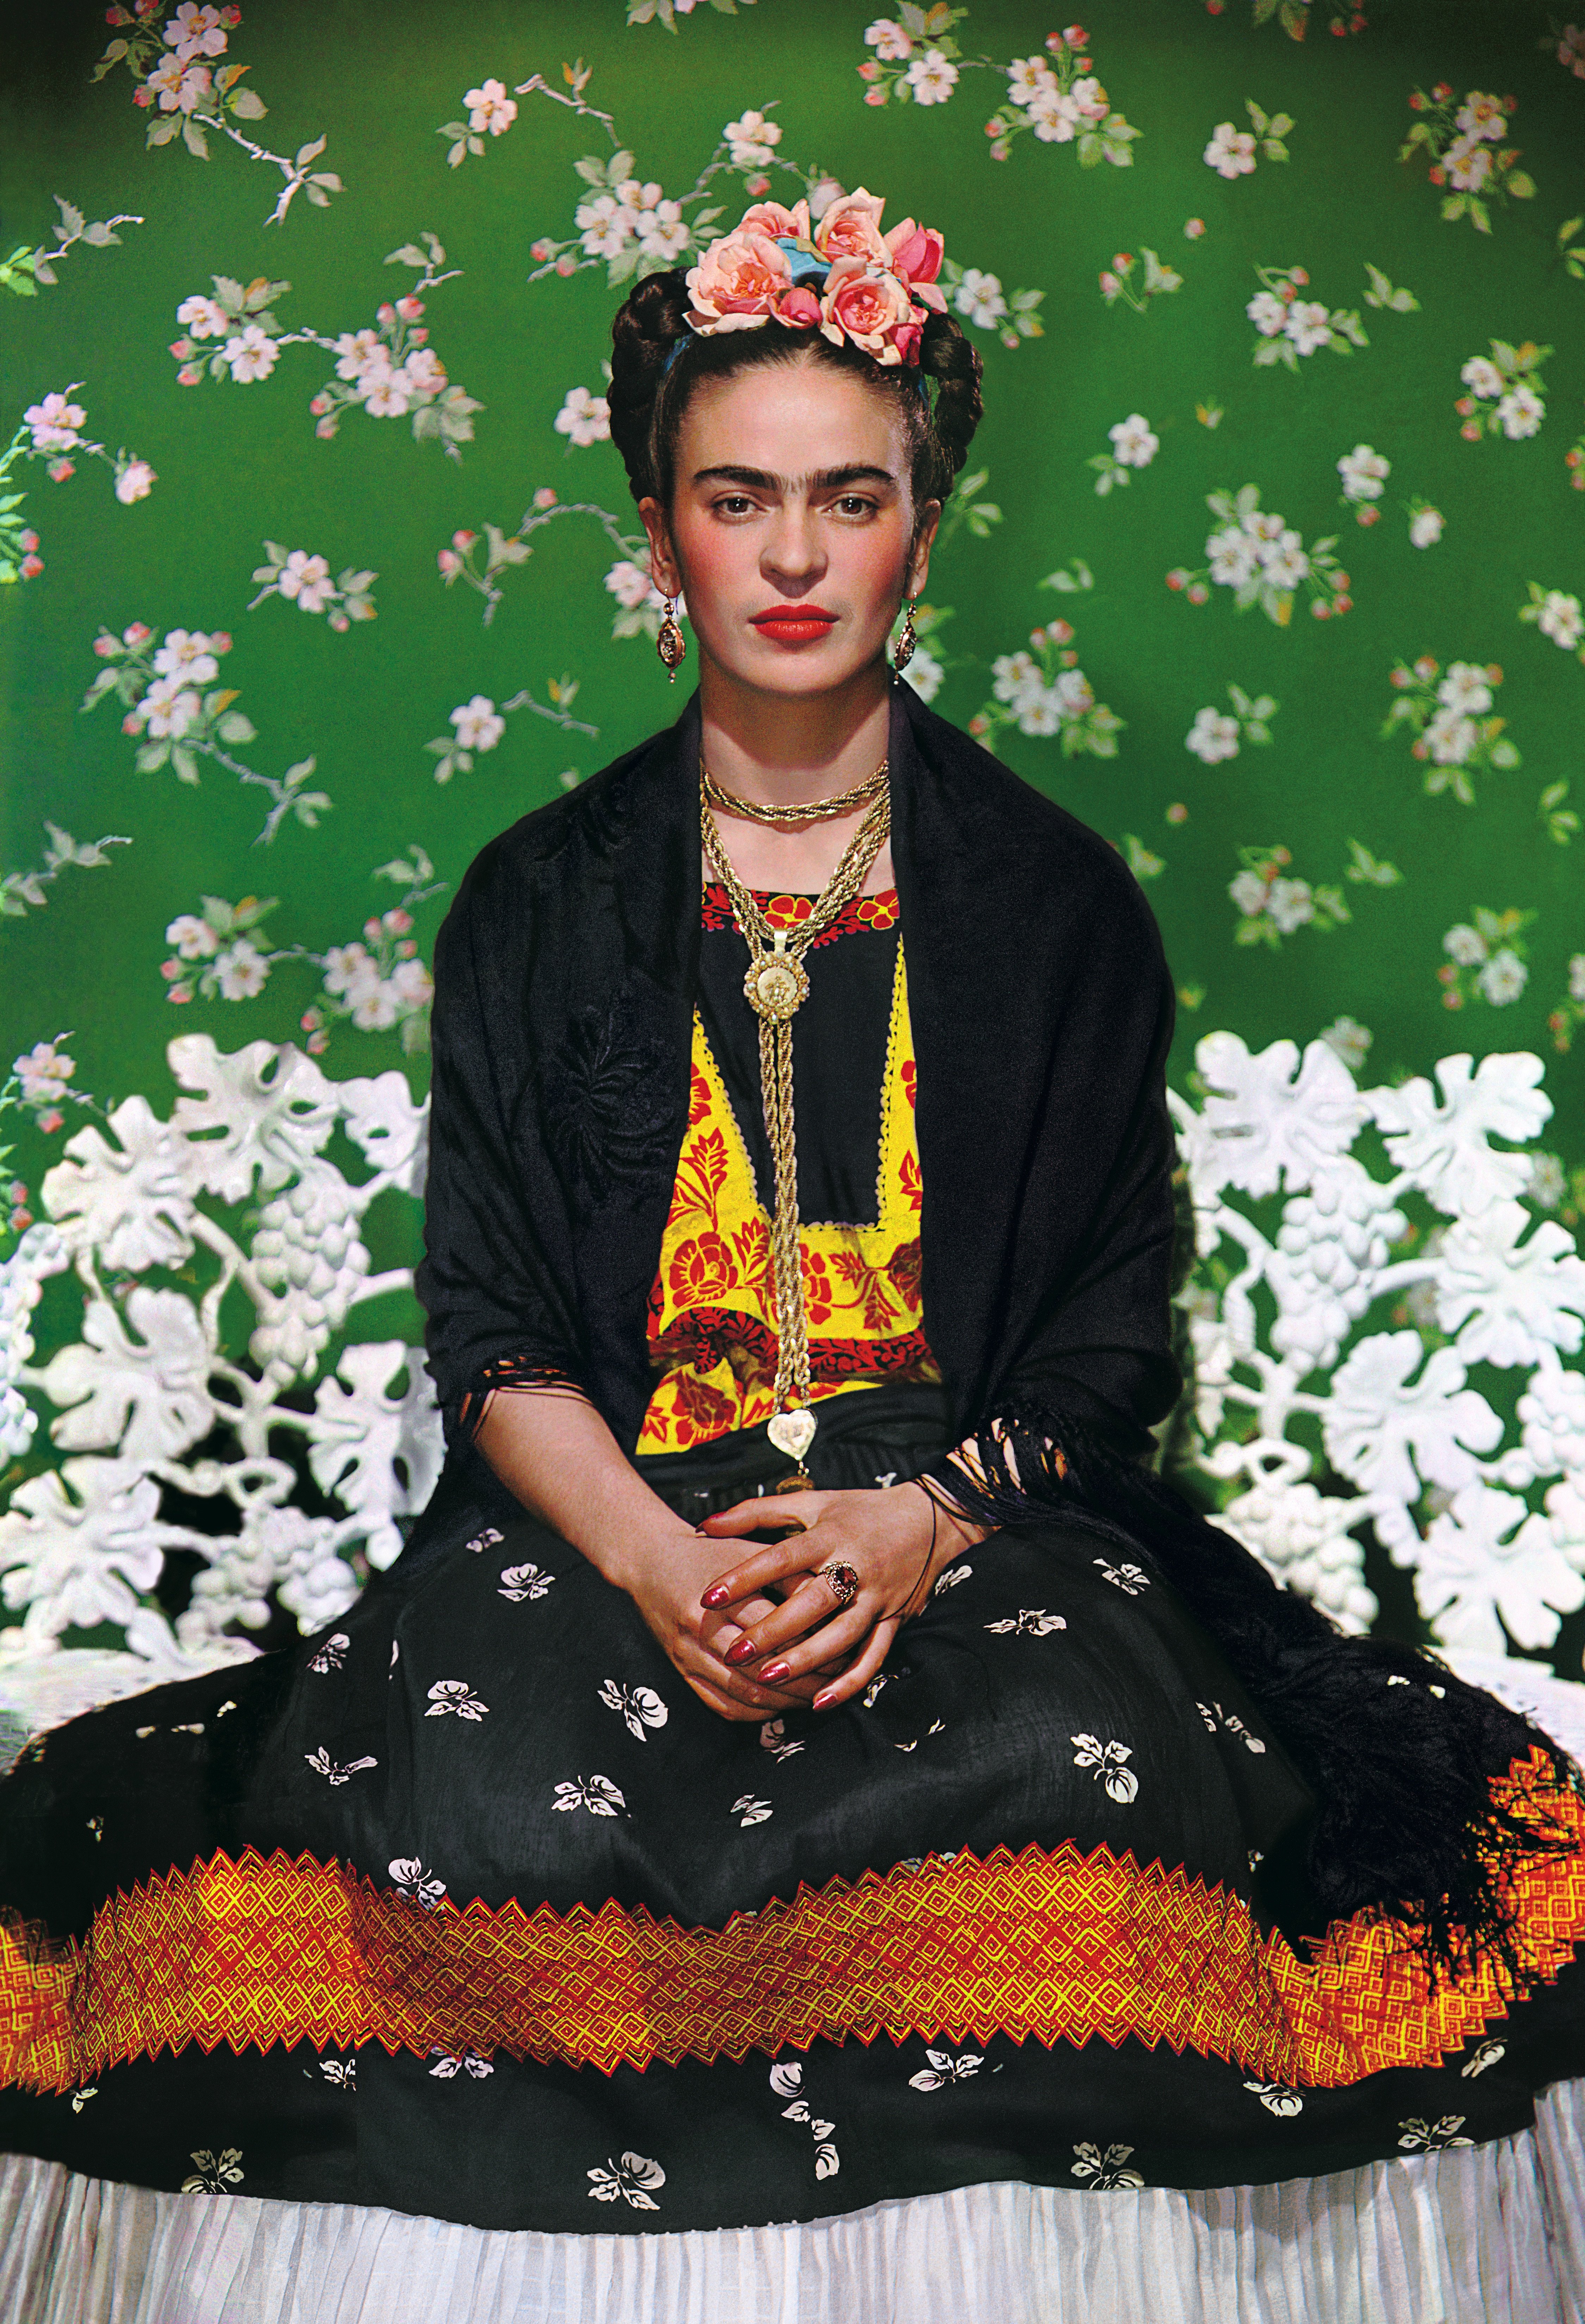 In Mexico City, an Immersive Frida Kahlo Extravaganza Is Running